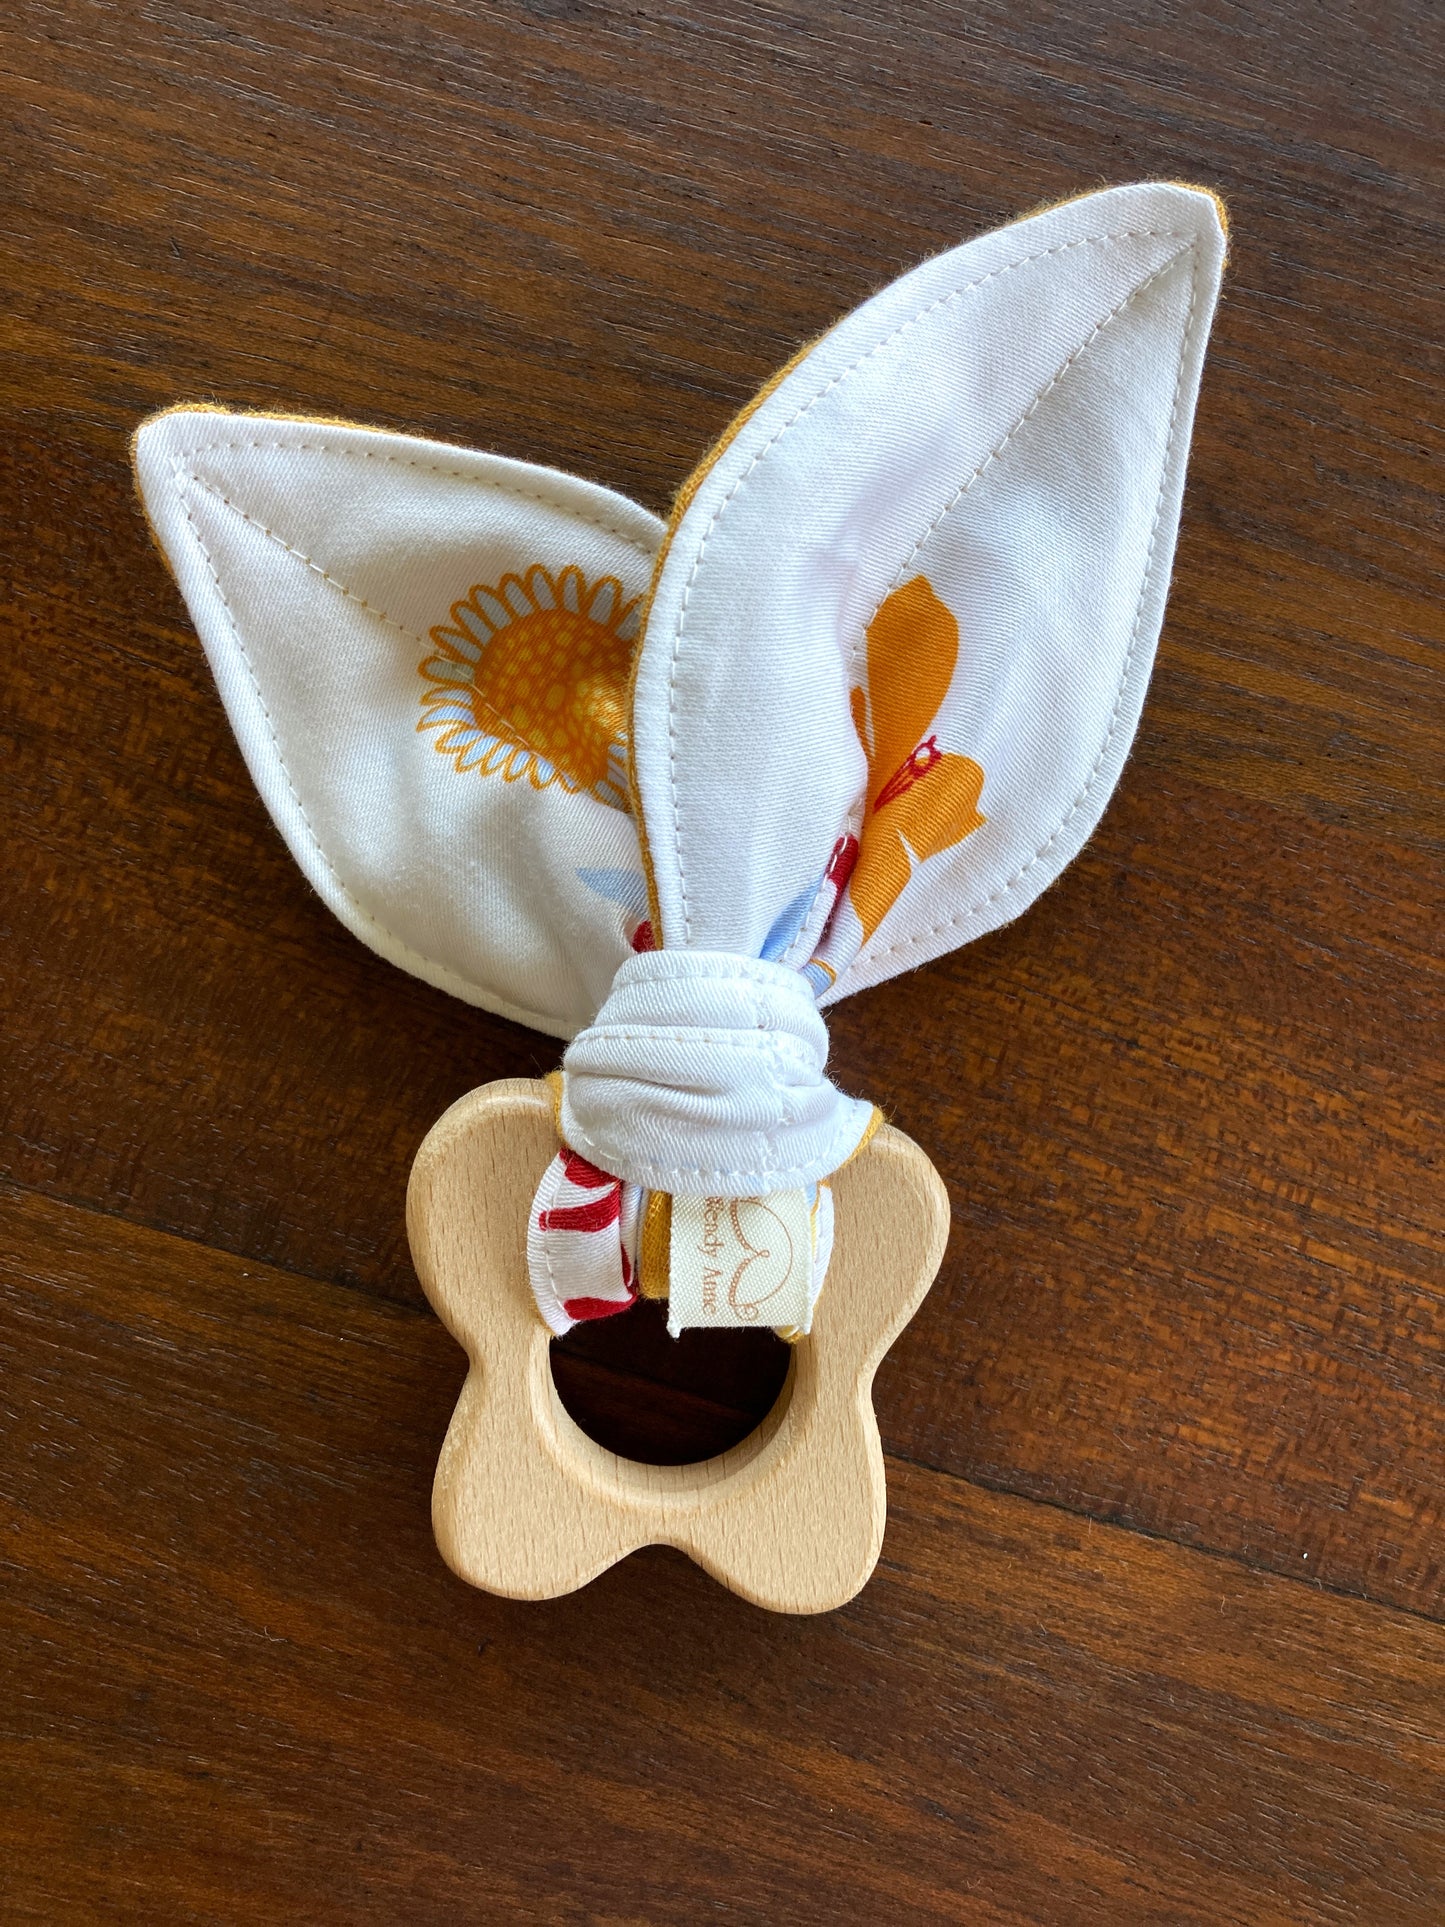 Baby Beech Wood Teether with Organic Cotton Fabric Tie